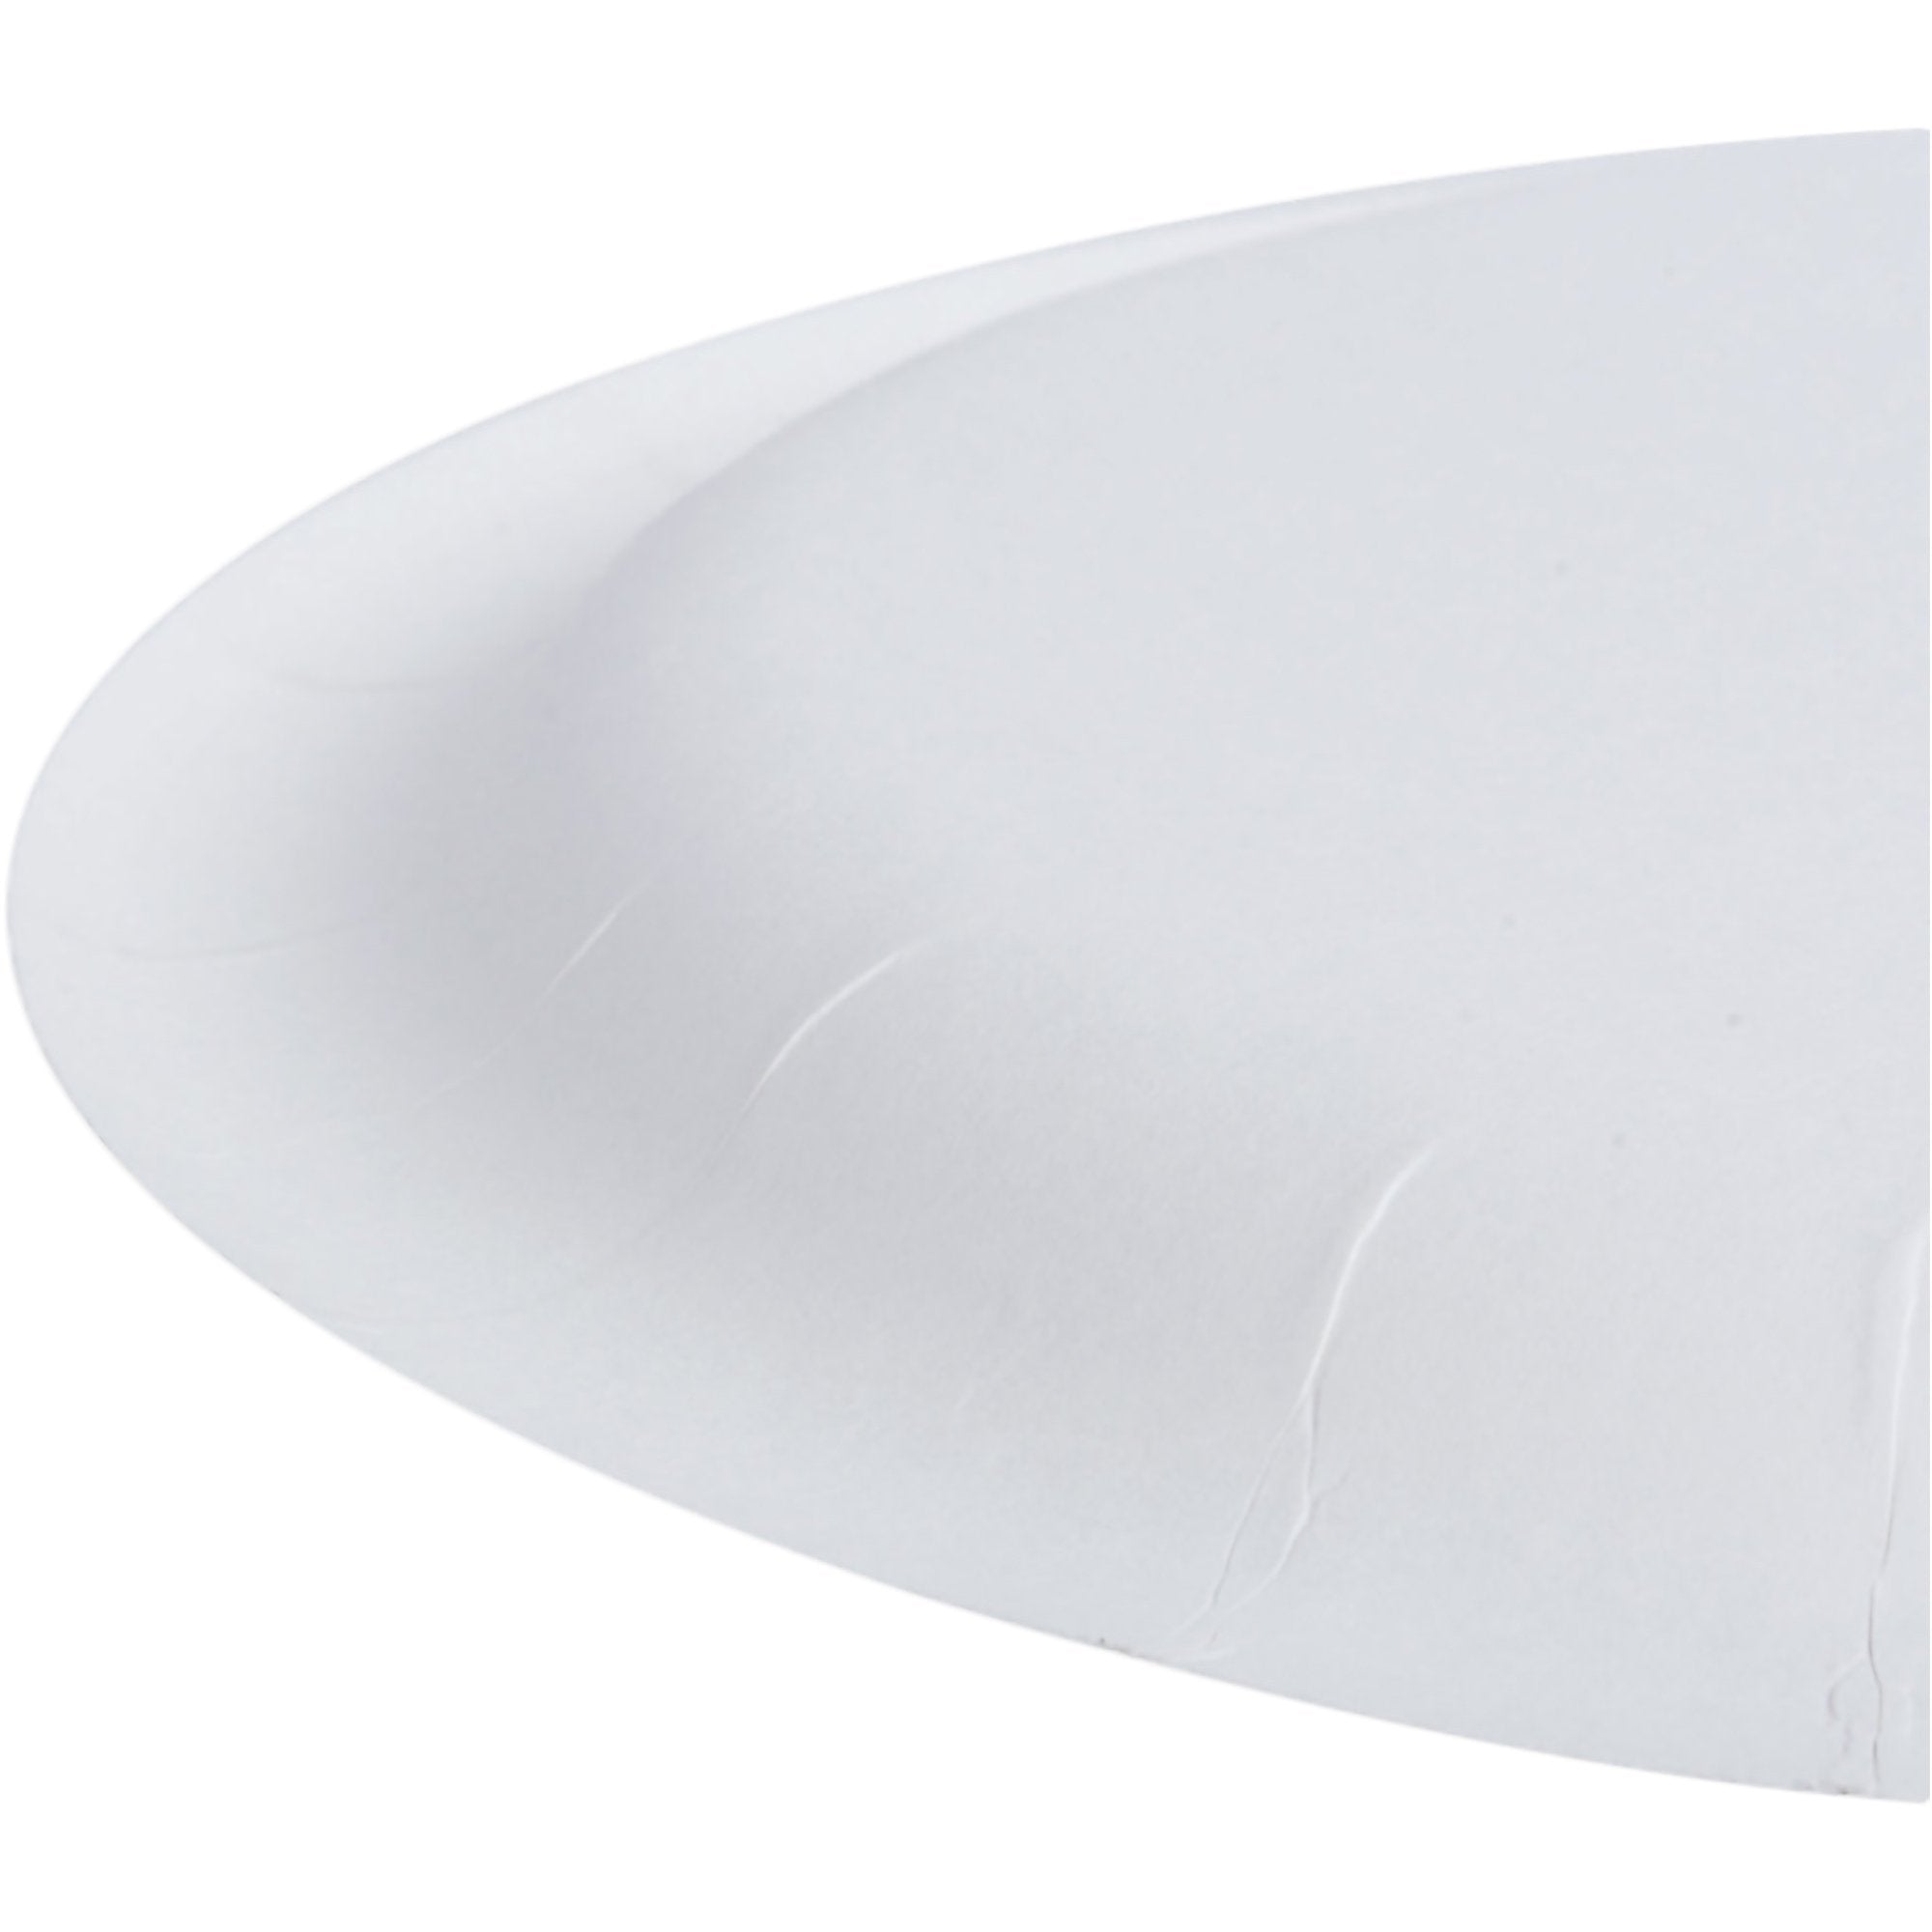 Bare® Coated Paper Plate, 8-1/2 Inch Diameter (500 Units)